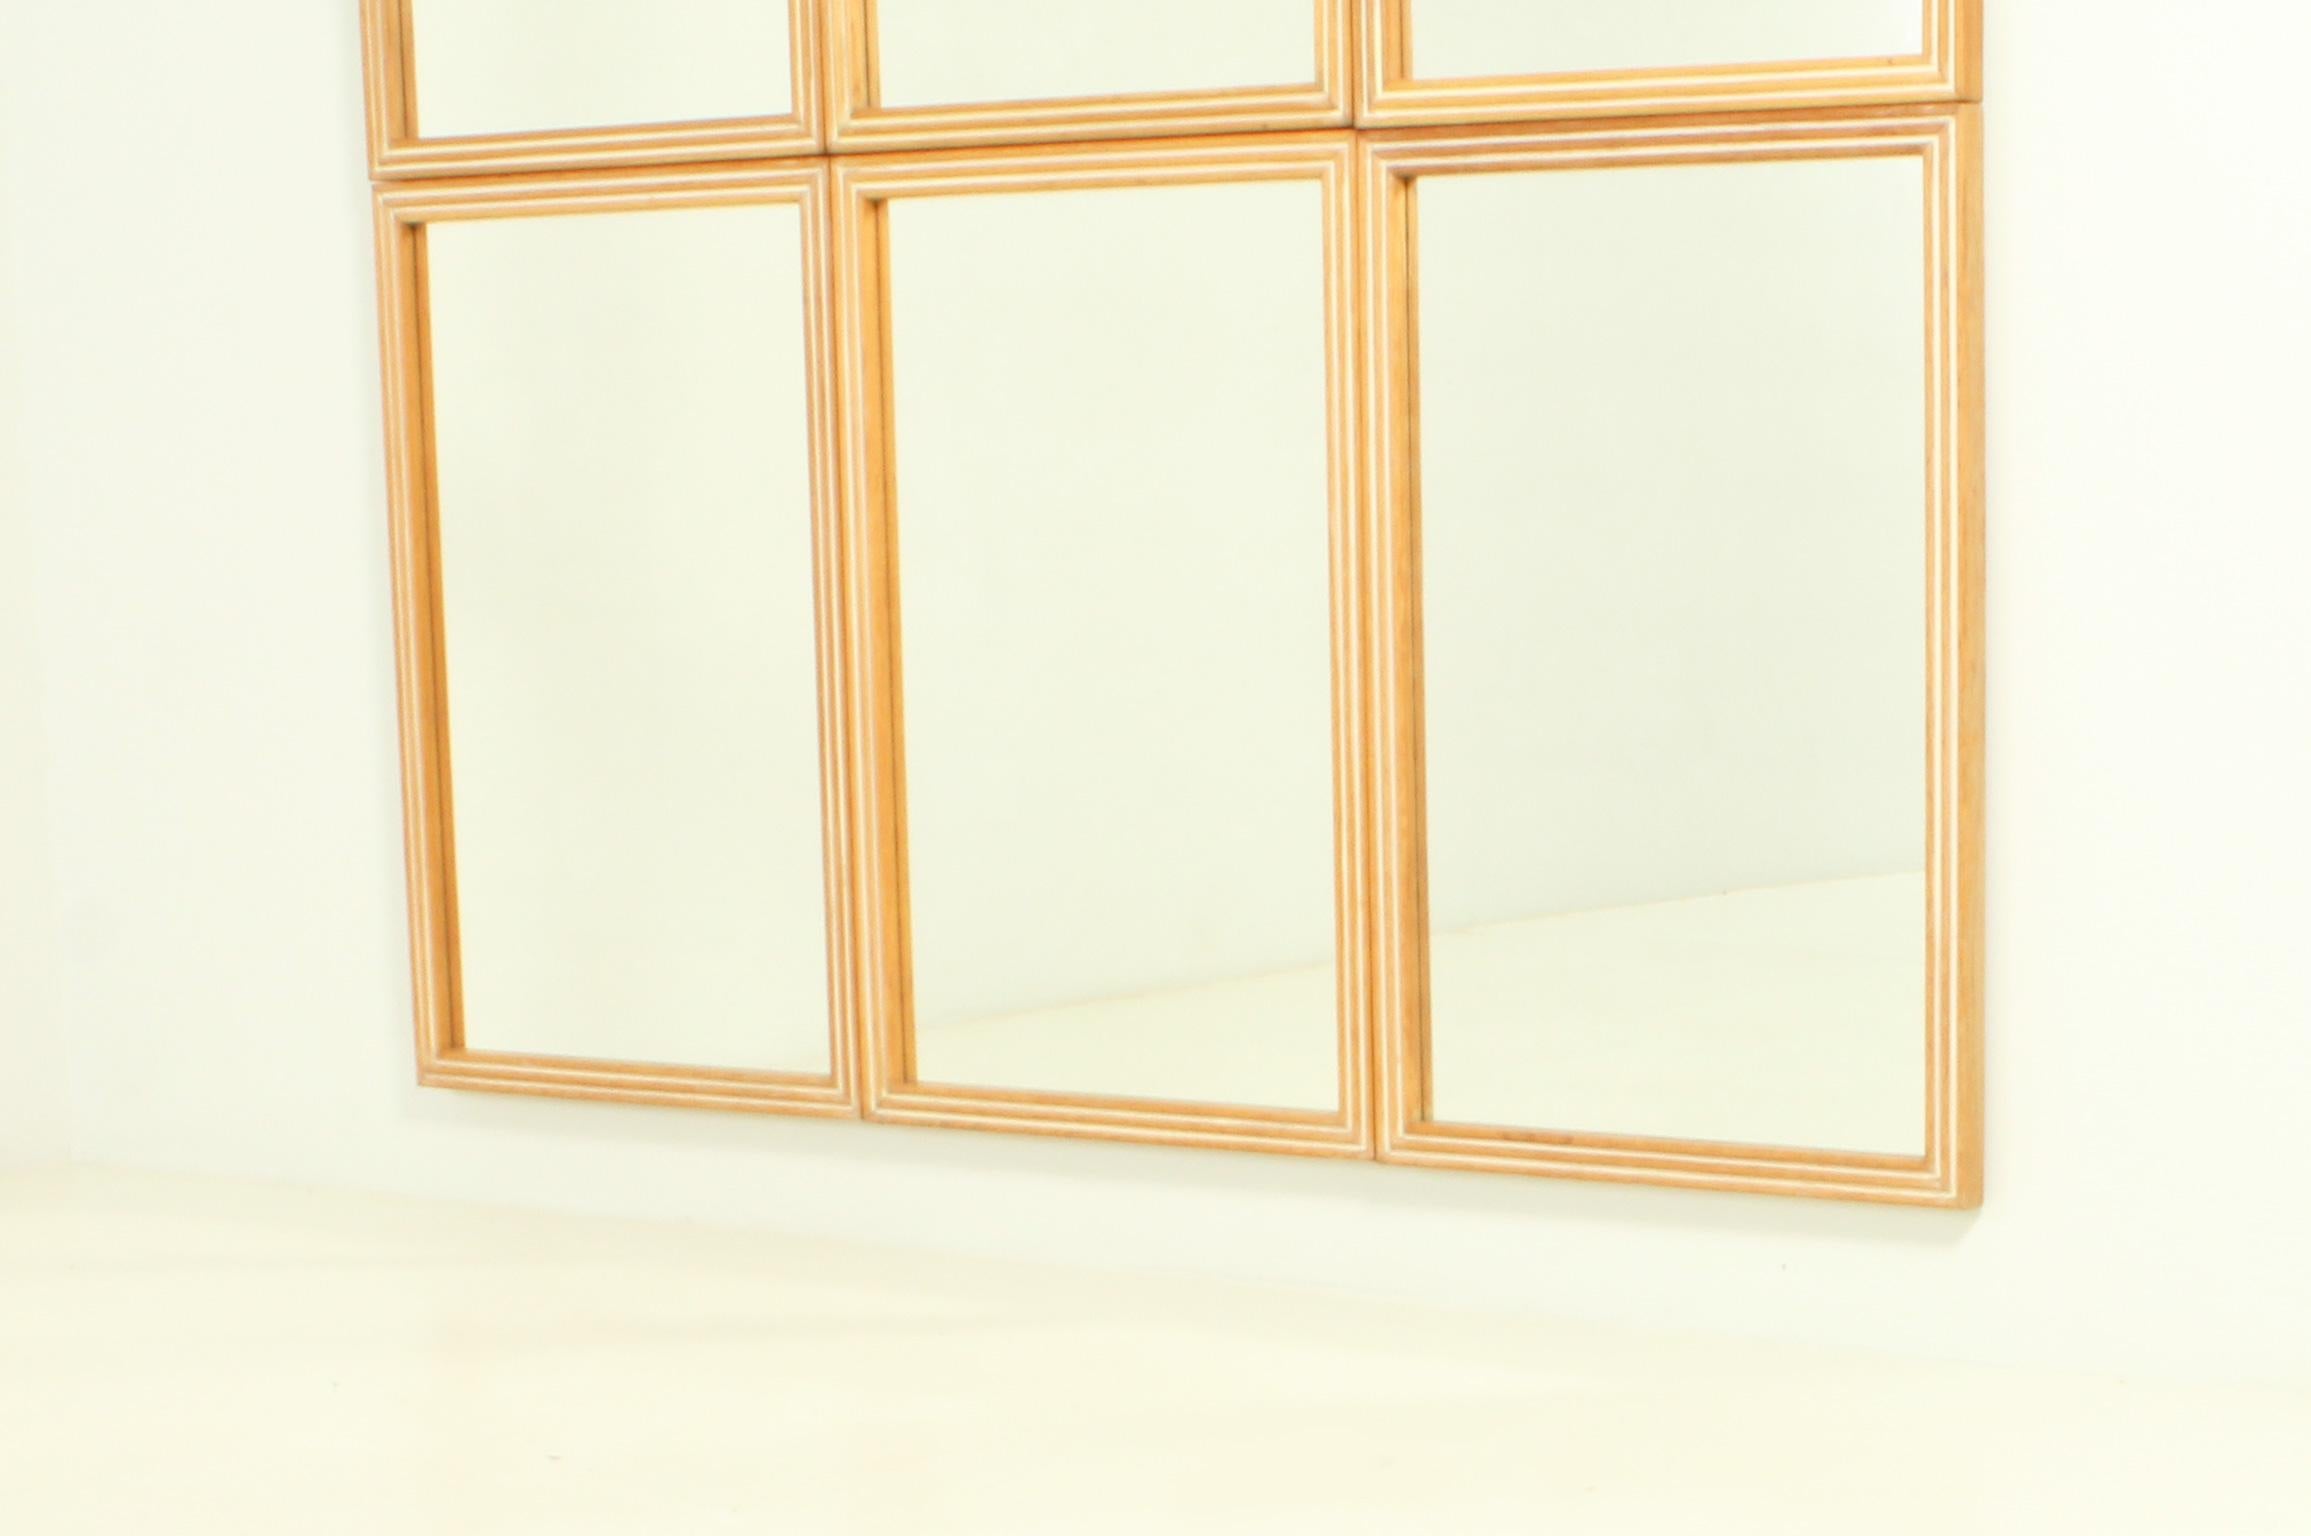 Spanish Set of Six Wall Mirrors in Cerused Oak, Spain, 1950's